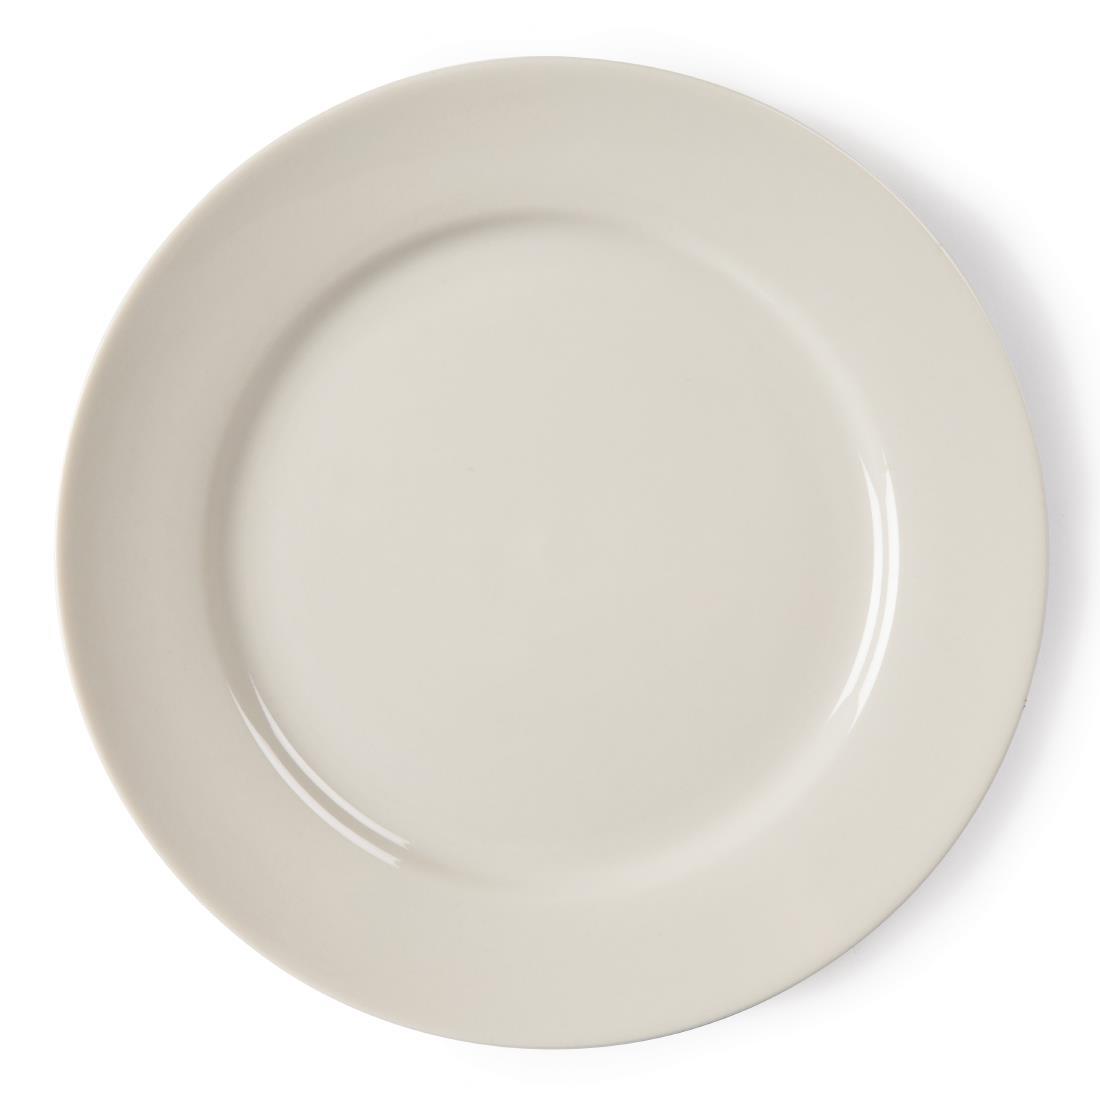 Olympia Ivory Wide Rimmed Plates 200mm (Pack of 12) - U119  - 3